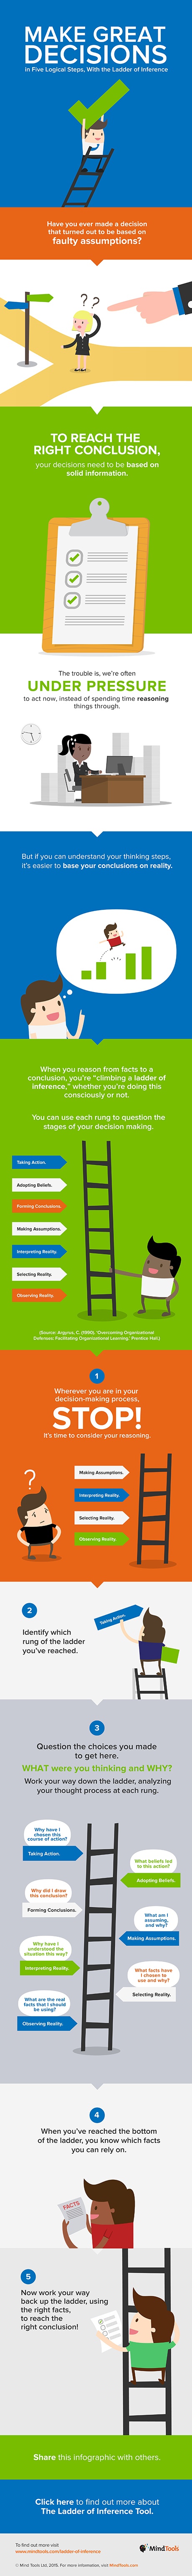 The Ladder of Inference Infographic